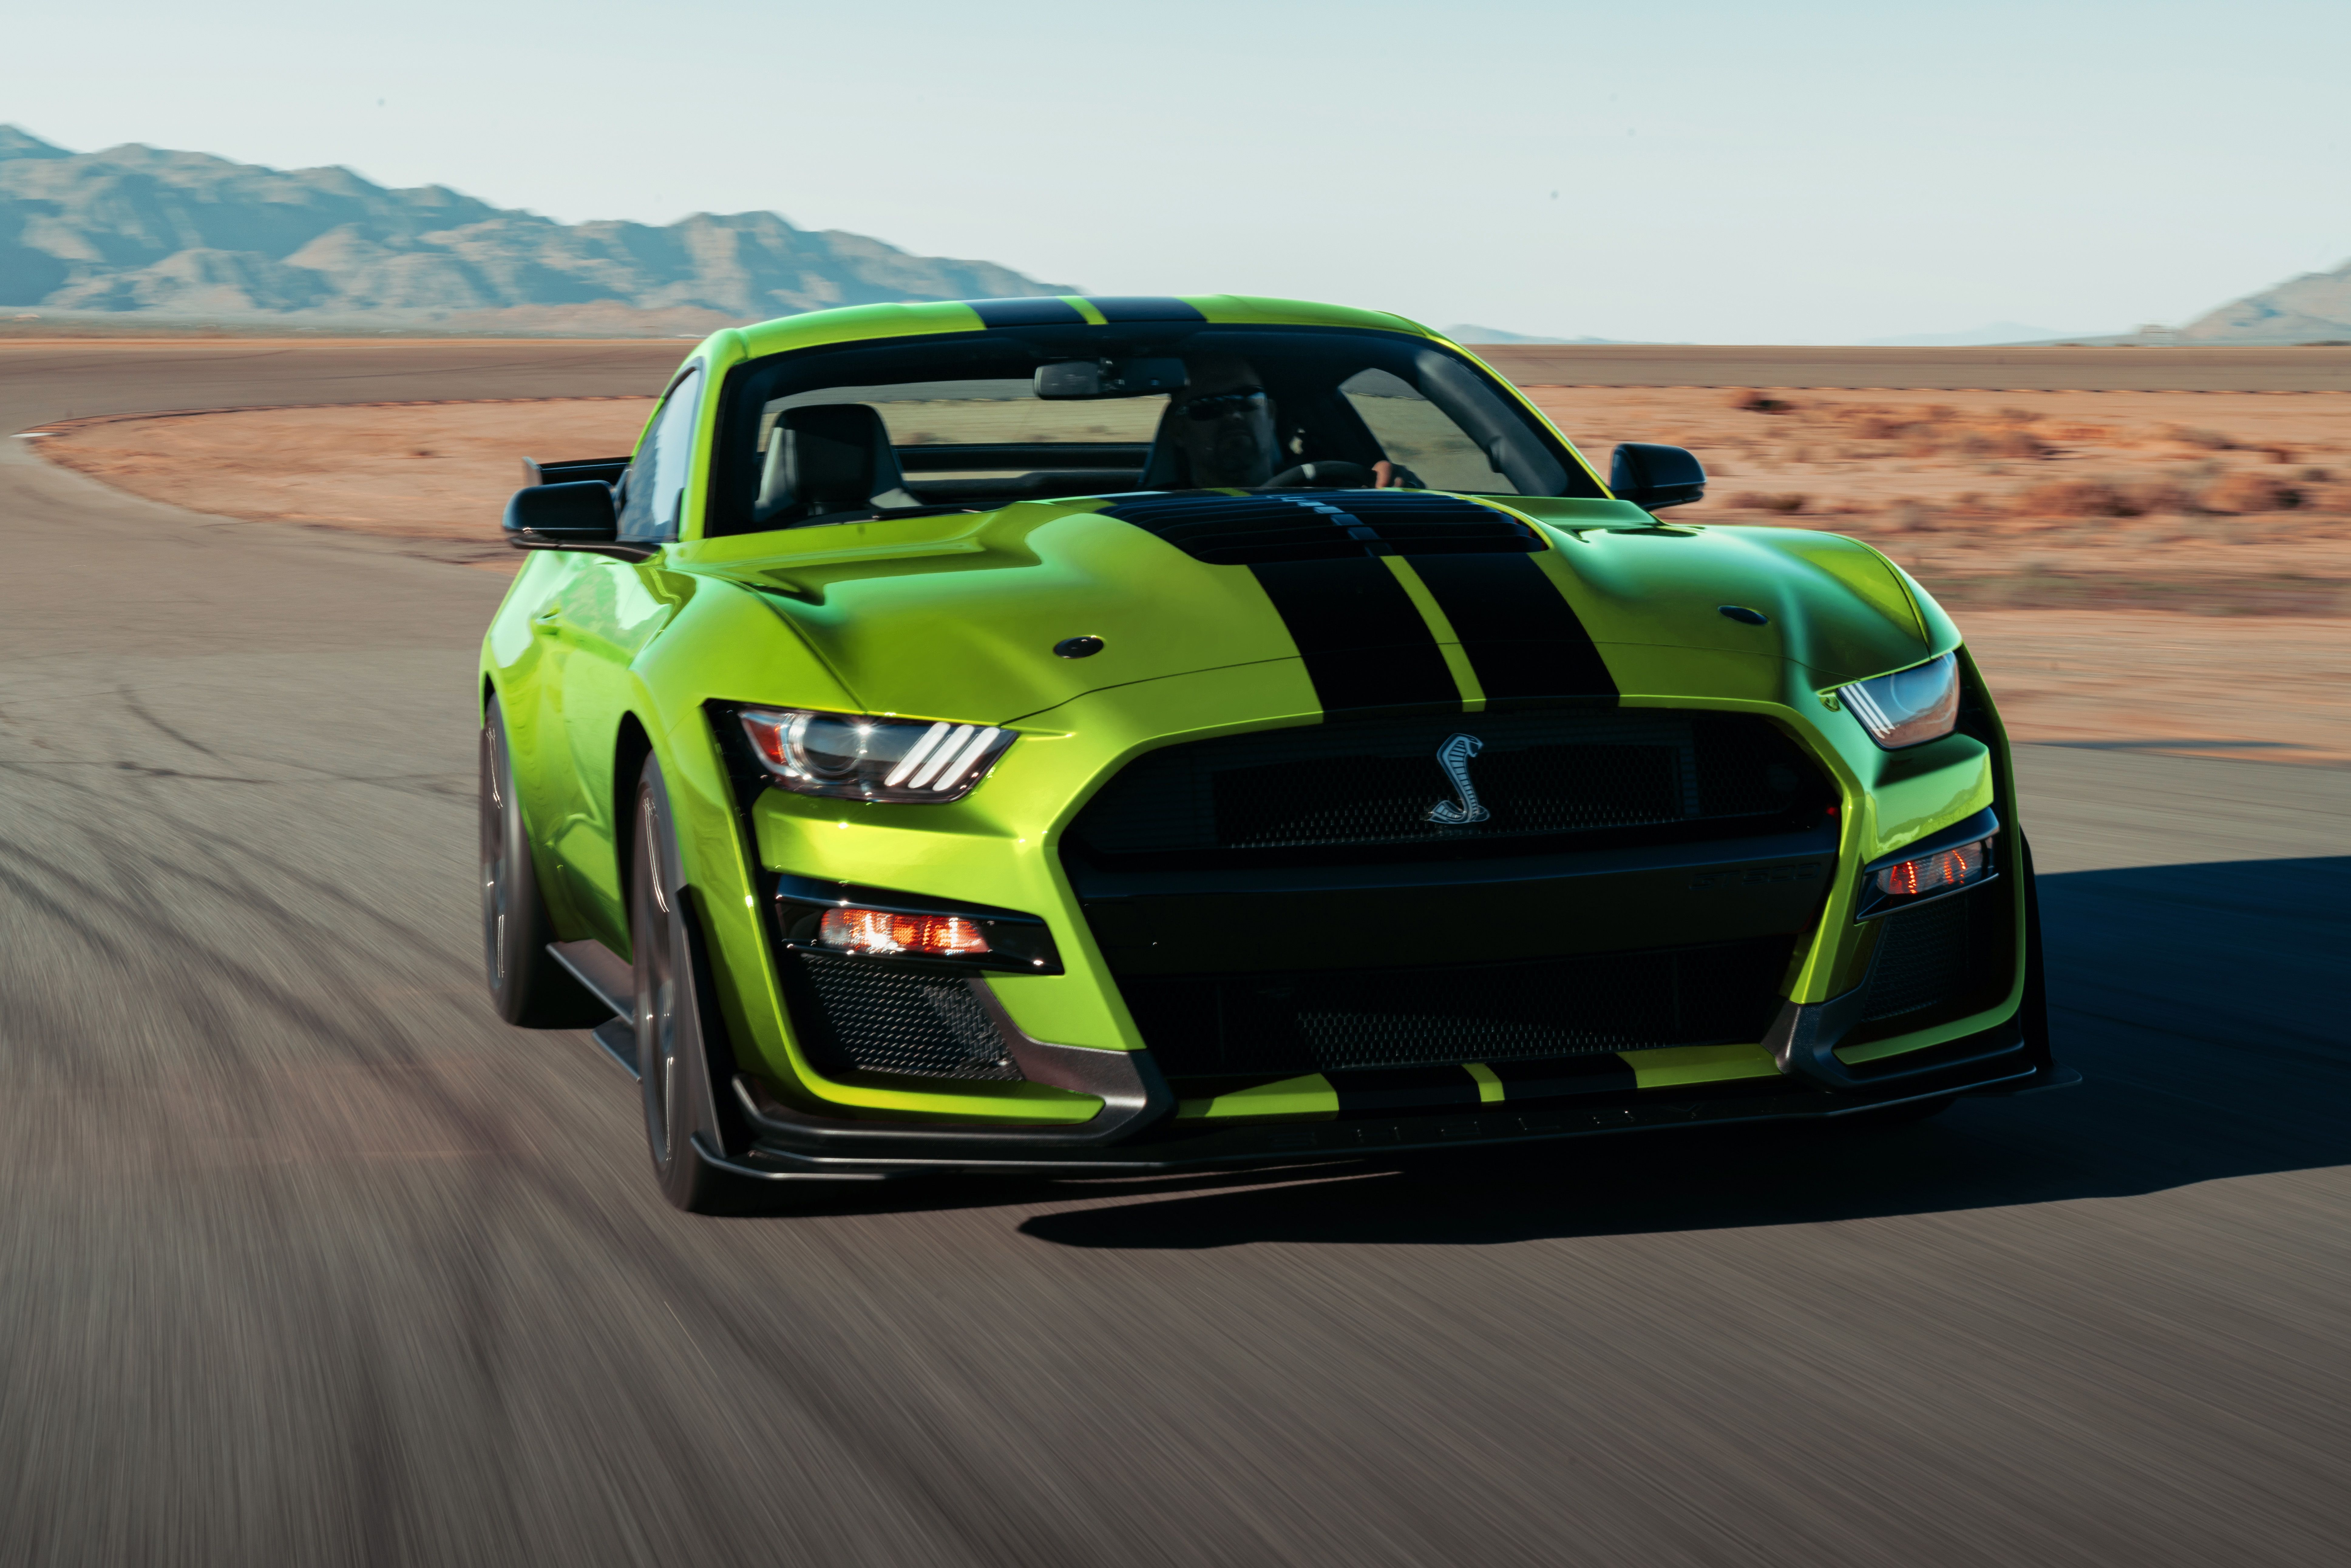 Car Ford Ford Mustang Ford Mustang Shelby Gt500 Green Car Muscle Car Vehicle Wallpaper:7746x5167